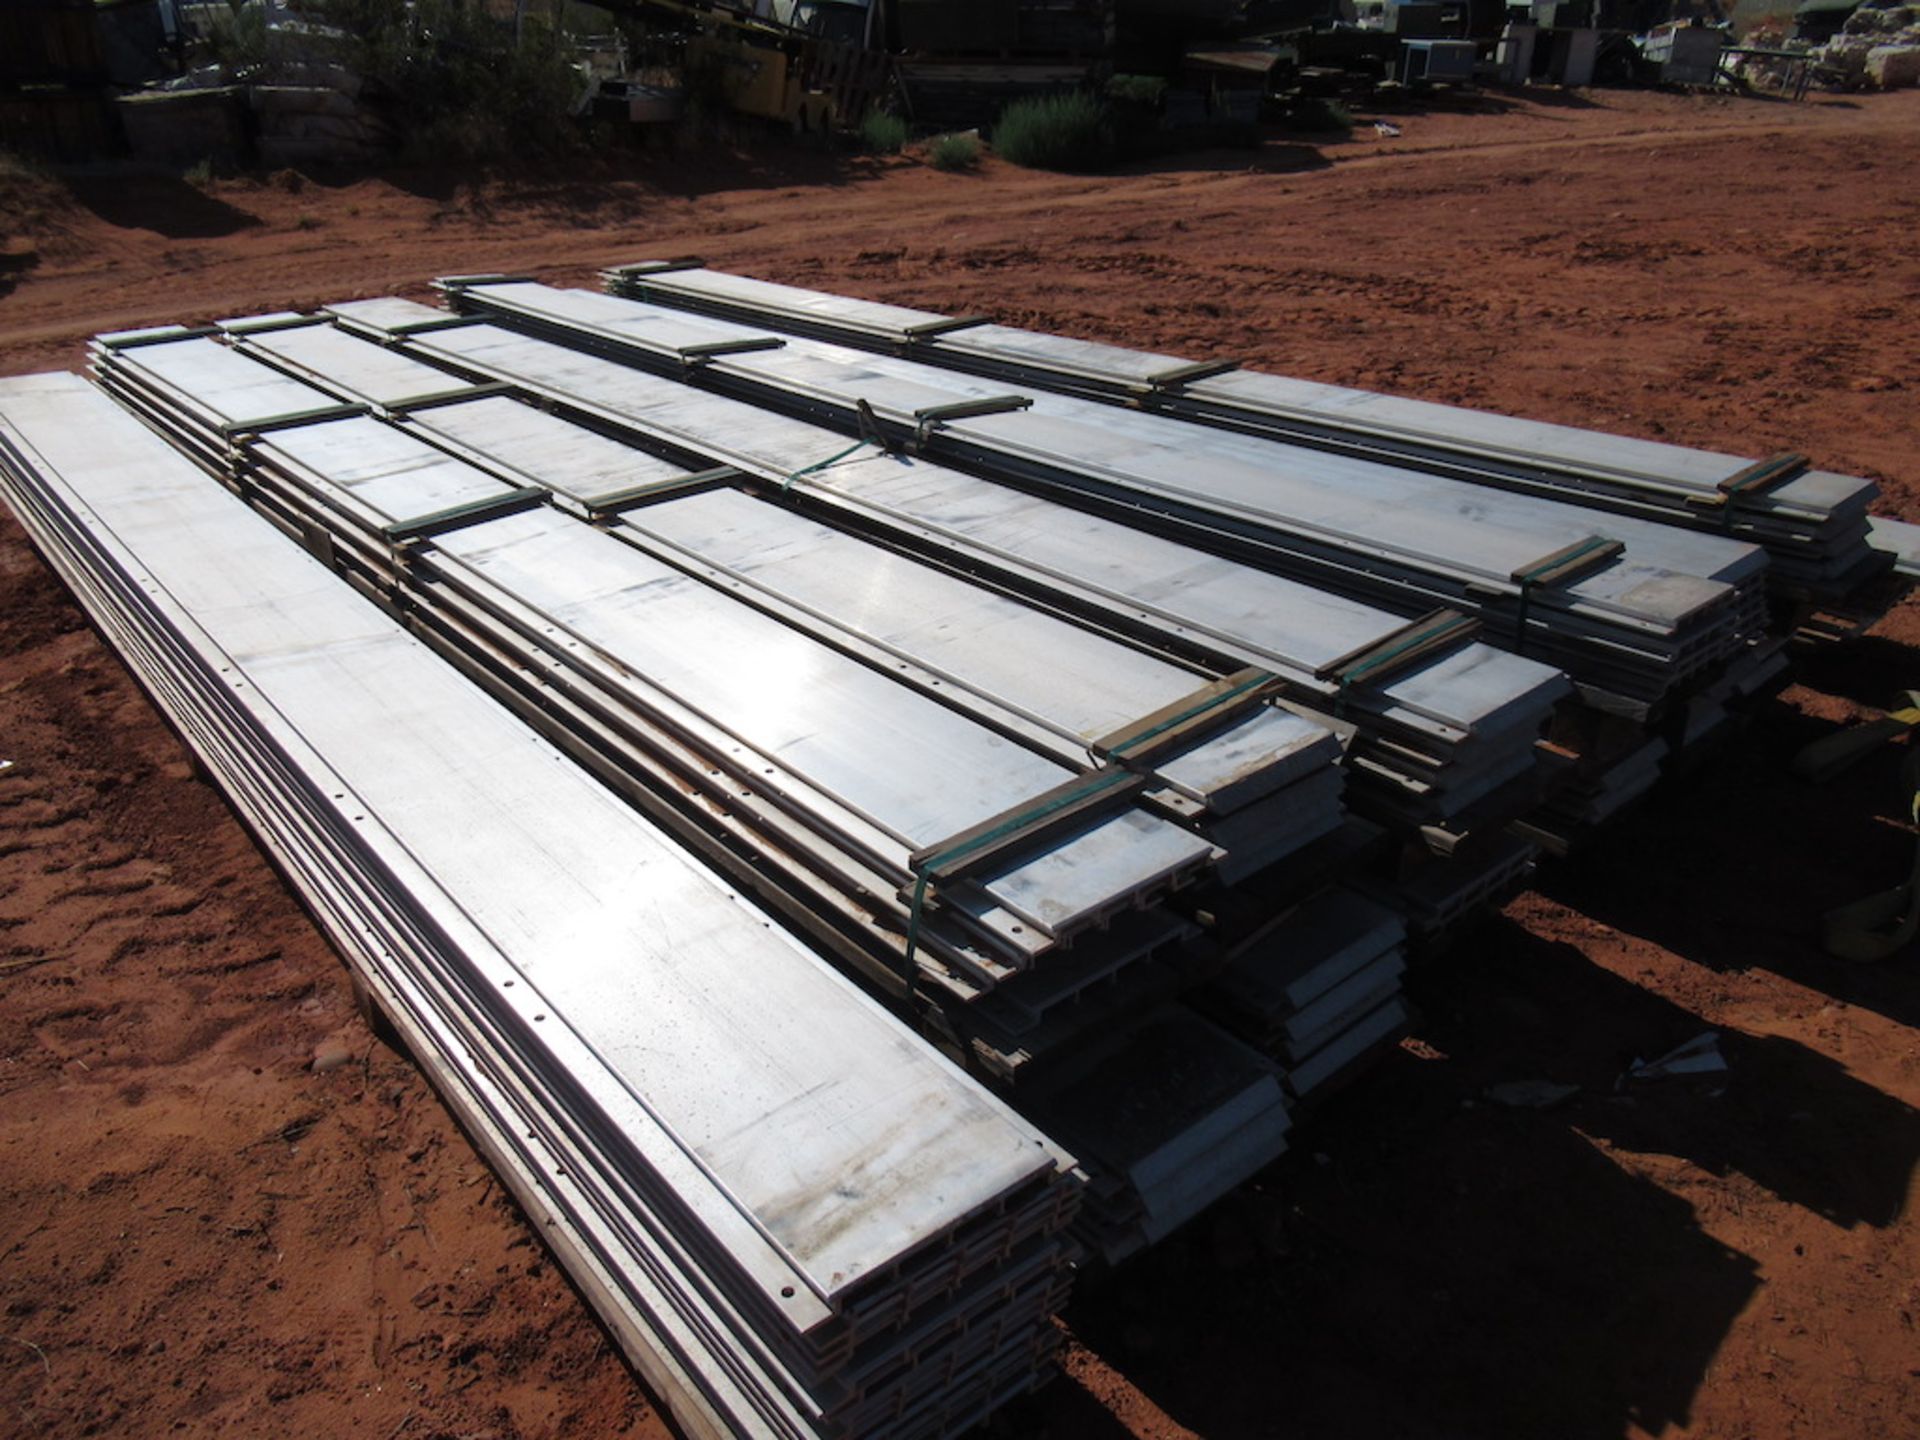 Lot of 74 Aluminum Planks Decking, 74, 6660 lbs, 192"x14"x1.5" (each), 192"x14"x26" (pallet), ISLE 2 - Image 3 of 5